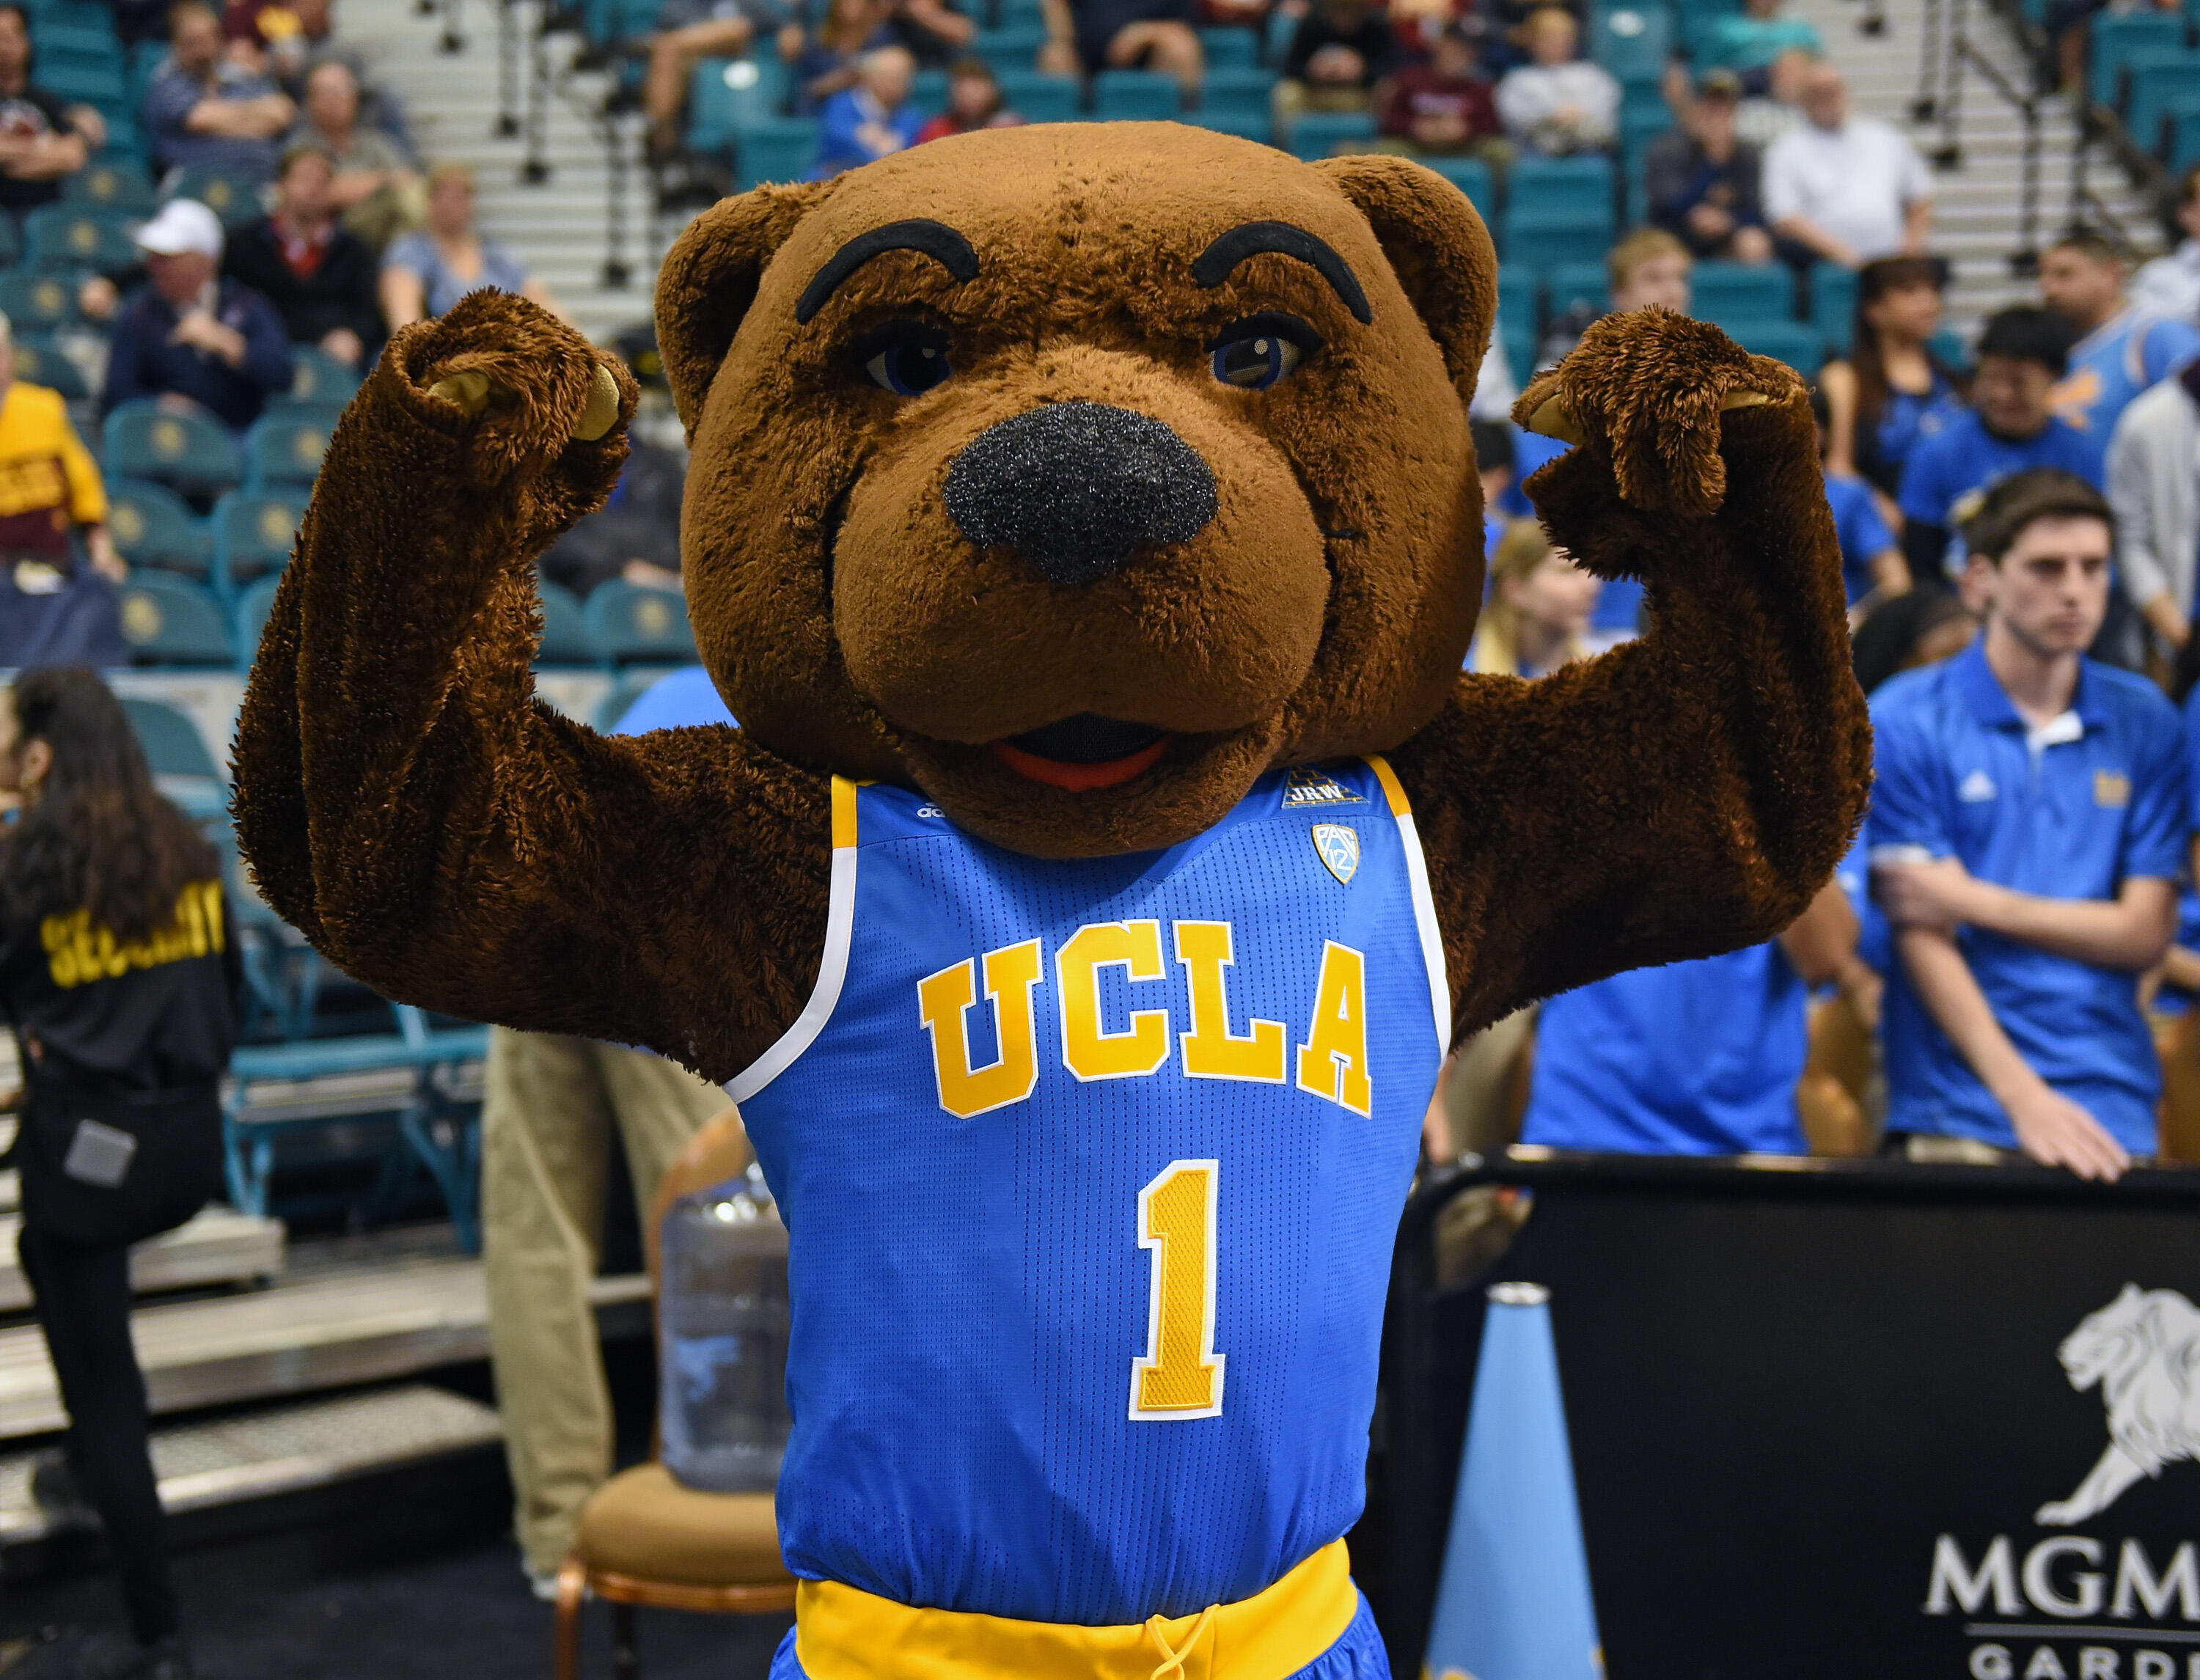 LAS VEGAS, NV - MARCH 09:  UCLA Bruins mascot Joe Bruin poses on the court before the team's first-round game of the Pac-12 Basketball Tournament against the USC Trojans at MGM Grand Garden Arena on March 9, 2016 in Las Vegas, Nevada. USC won 95-71.  (Pho